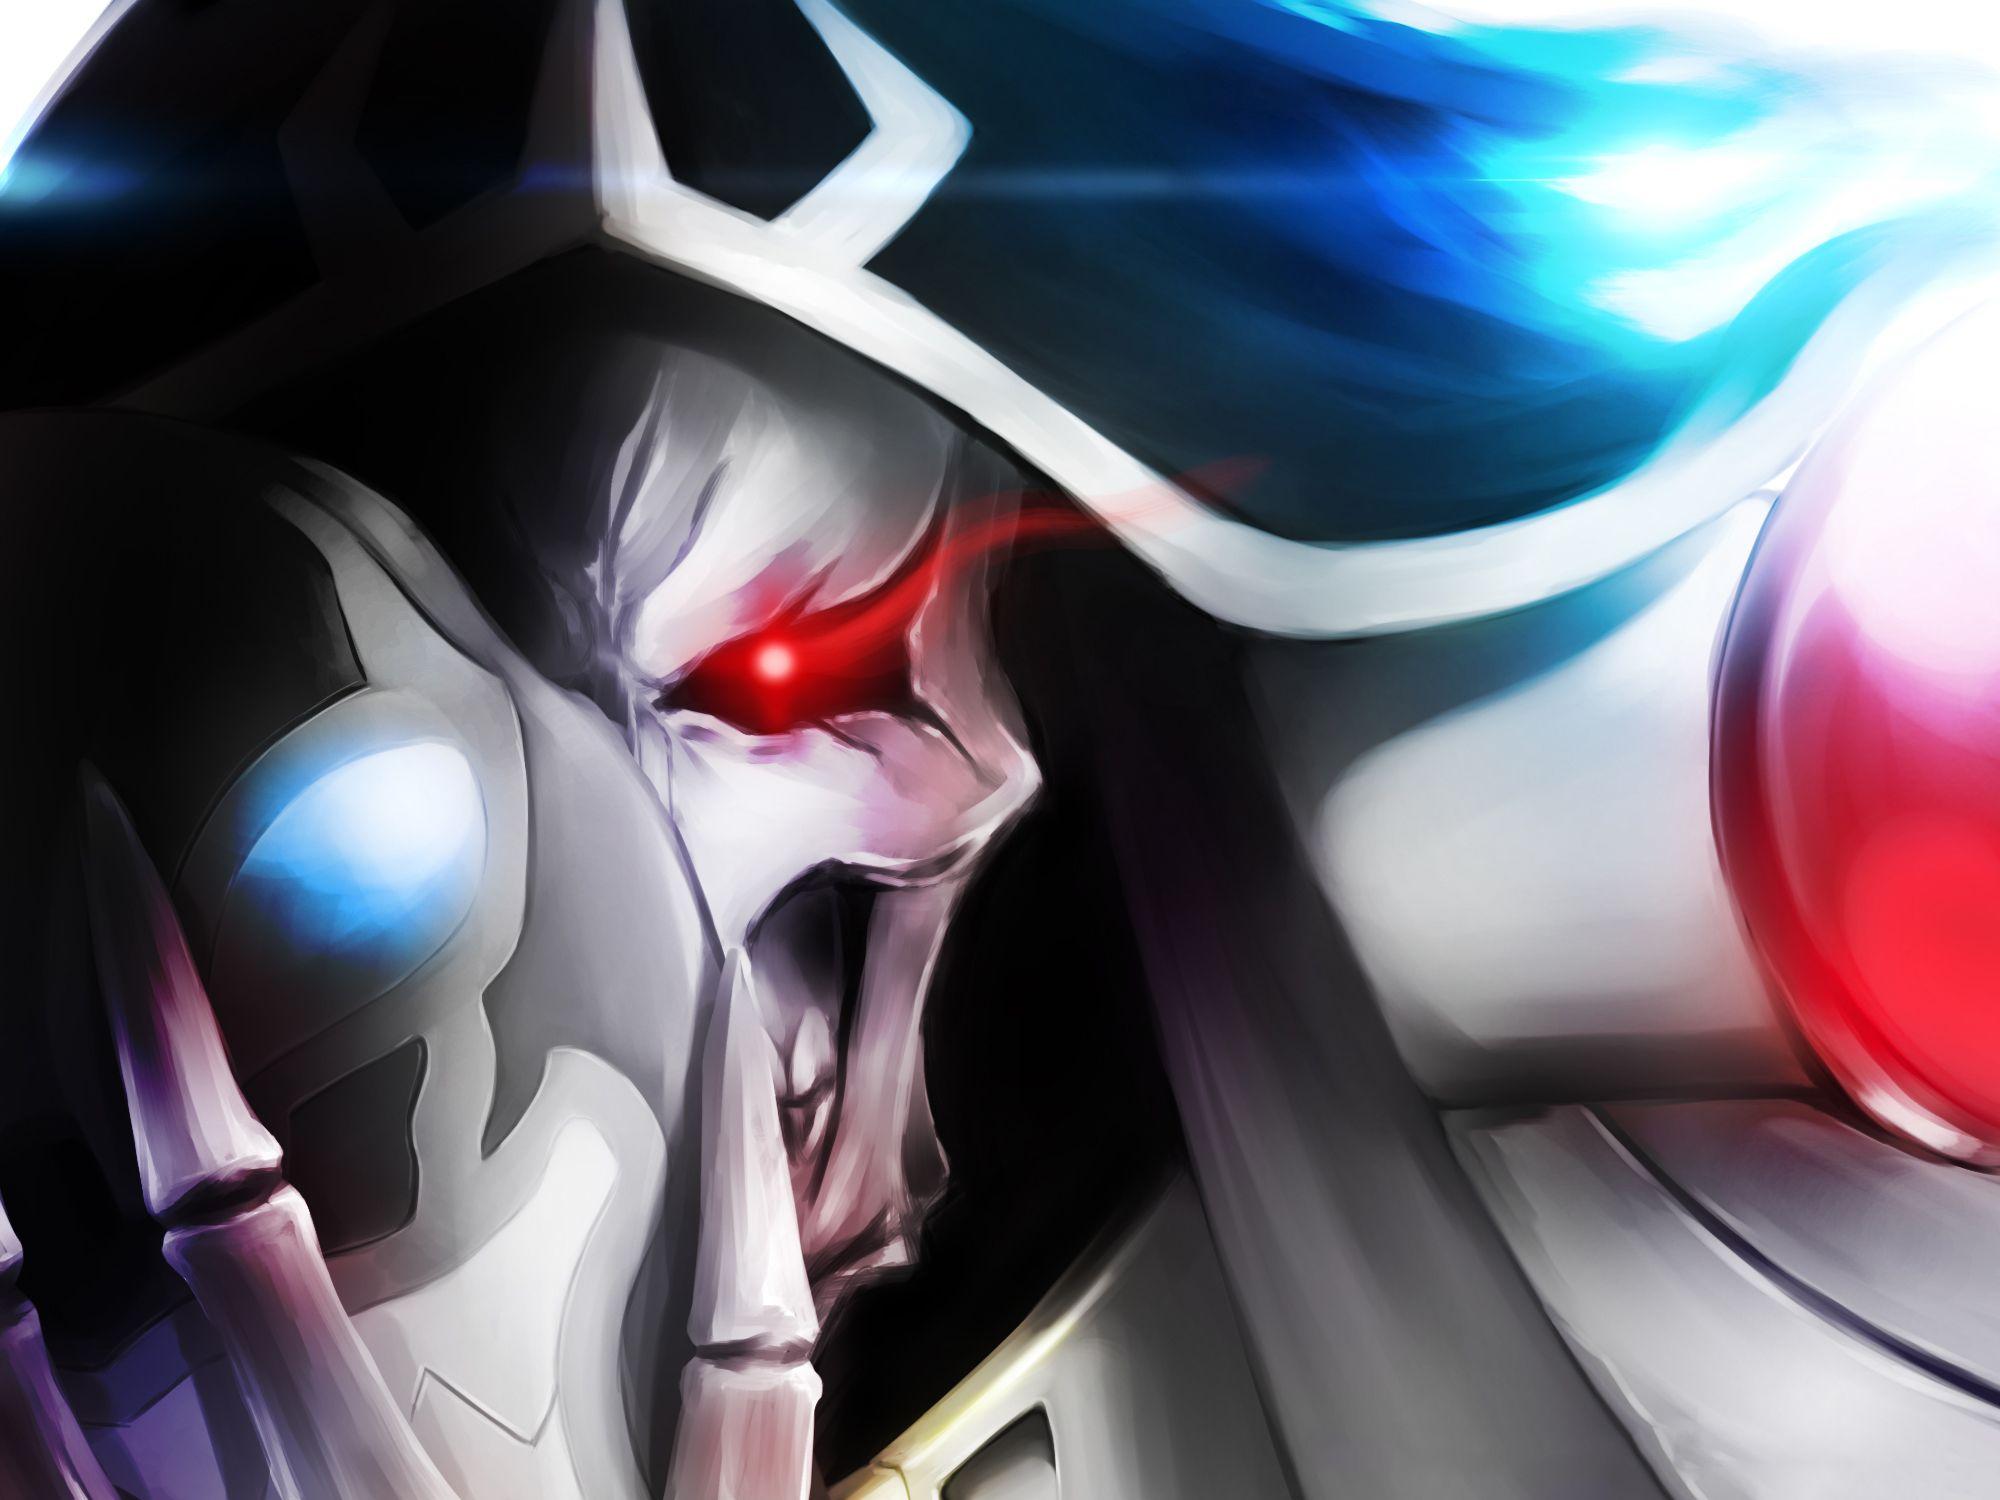 Anime Overlord Ainz Ooal Gown Overlord Wallpaper. Ainz